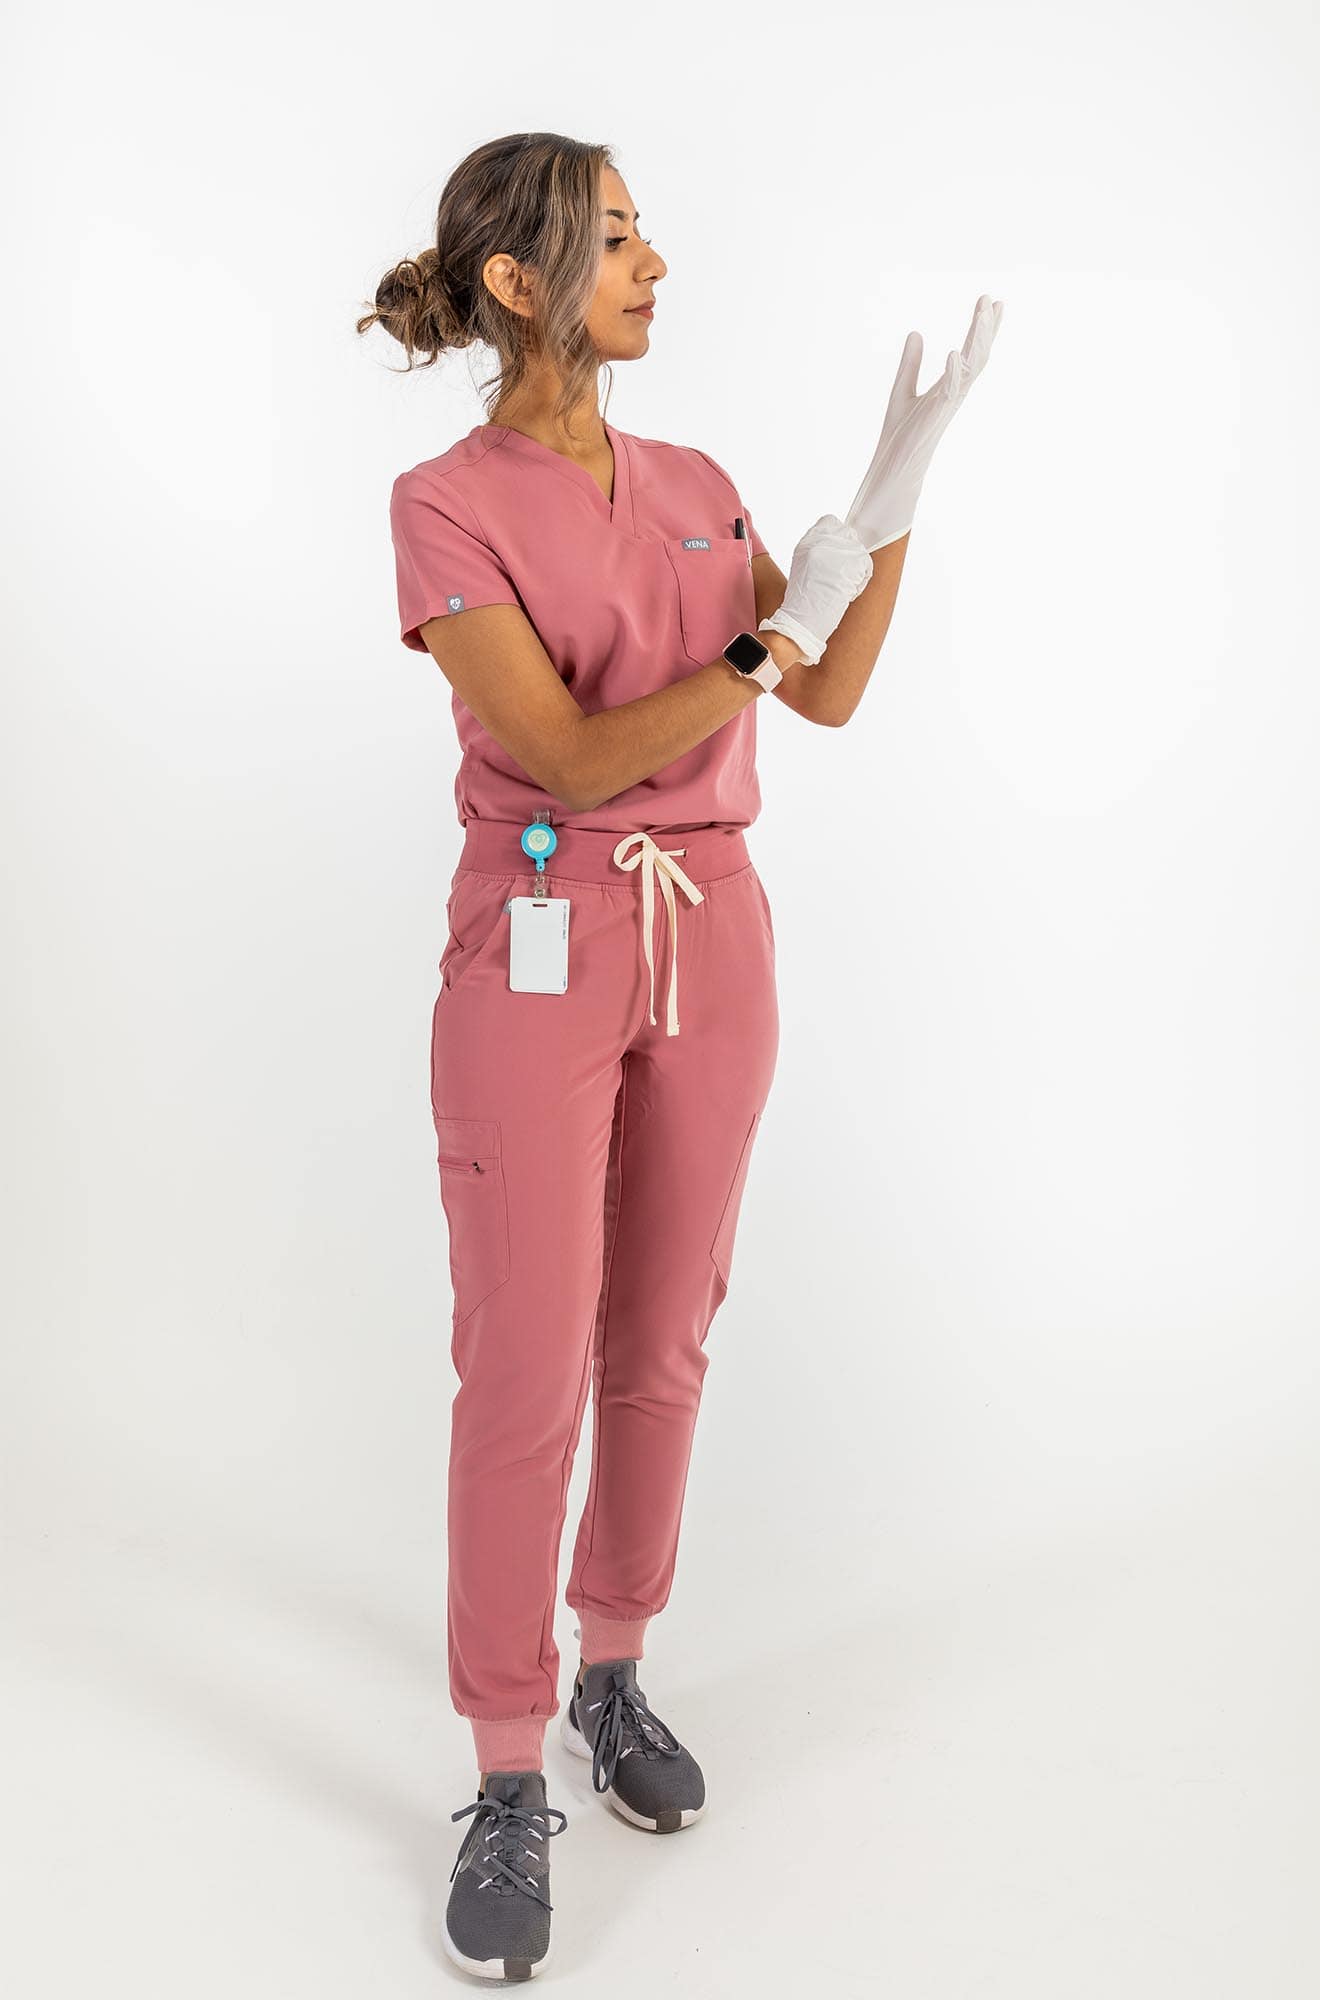 VENA ladies jogger style scrub shirt lady stretching the globes in her hand#colour_rose